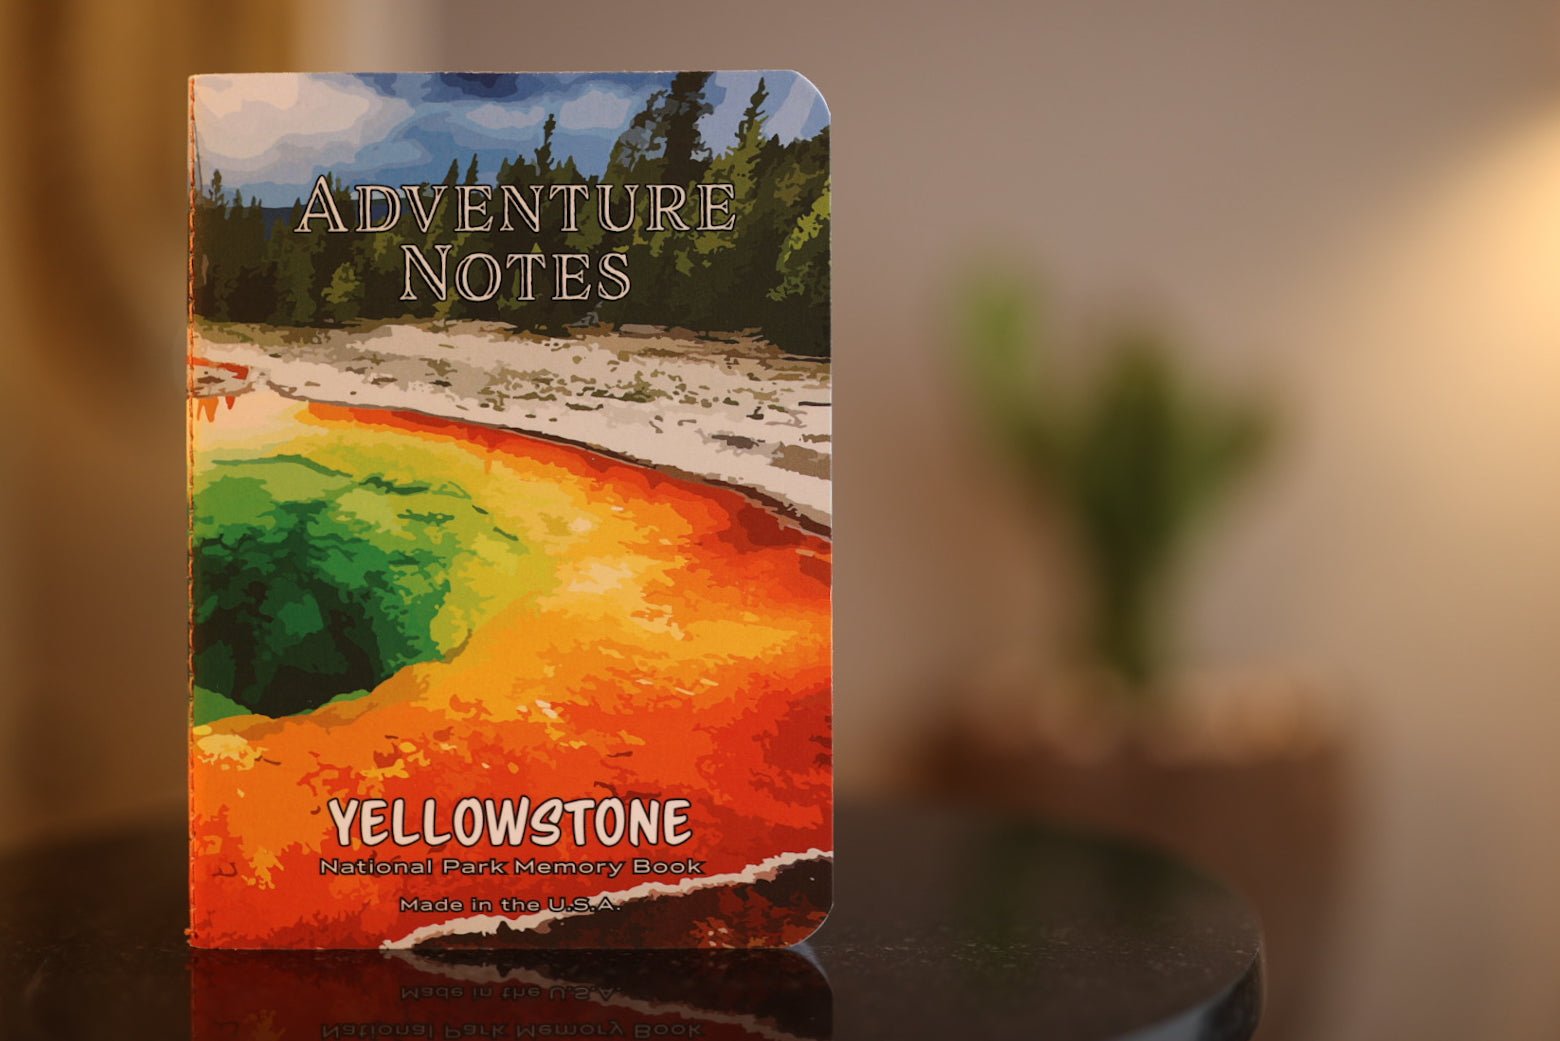 Adventure Notes - Yellowstone National Park - My Nature Book Adventures